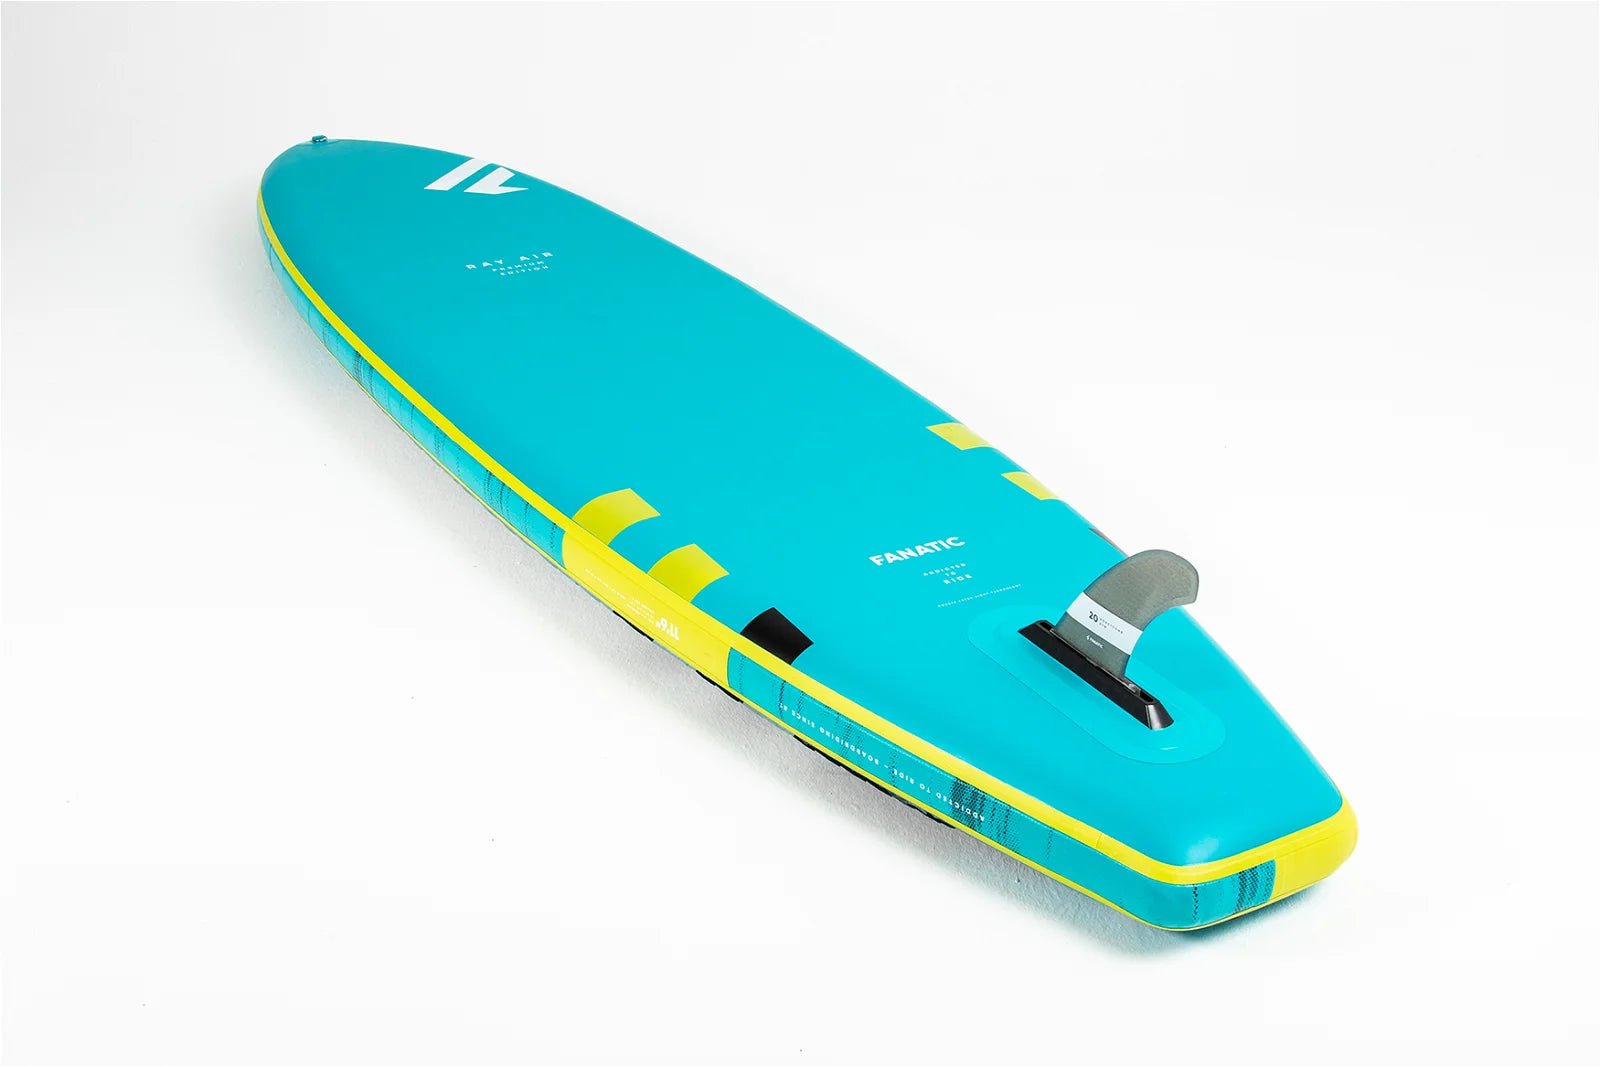 Fanatic Package Ray Air Premium/C35 2022 iSUP Paddleboard - Worthing Watersports - 9008415938483 - iSUP Packages - Fanatic SUP